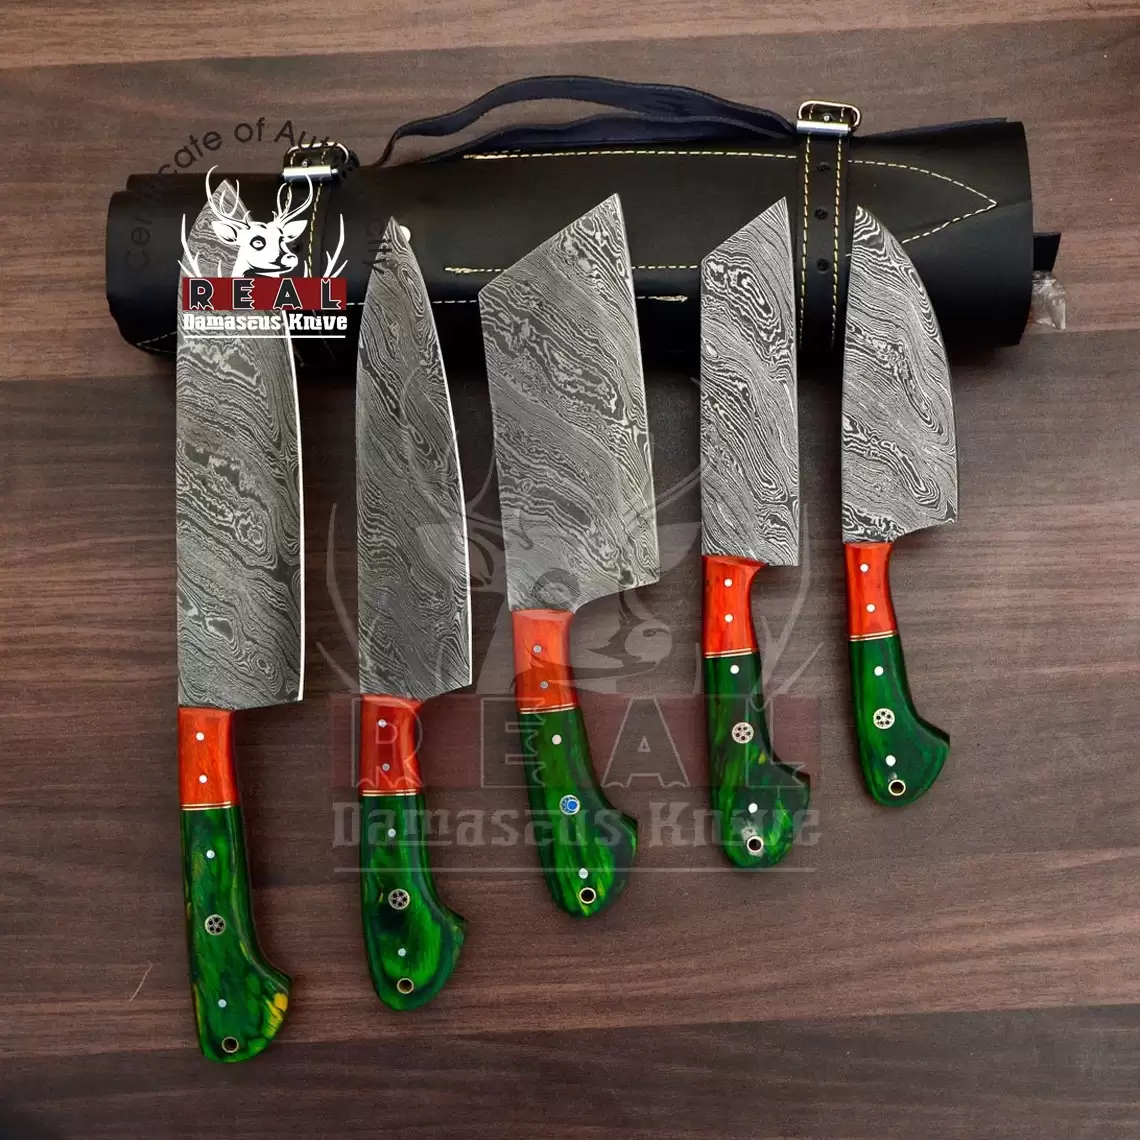 https://www.realdamascusknive.com/image/cache/cache/1001-2000/1244/main/1bd4-handmade-damascus-chef-set-of-5pcs-with-leather-cover-0-1-1140x1140.webp